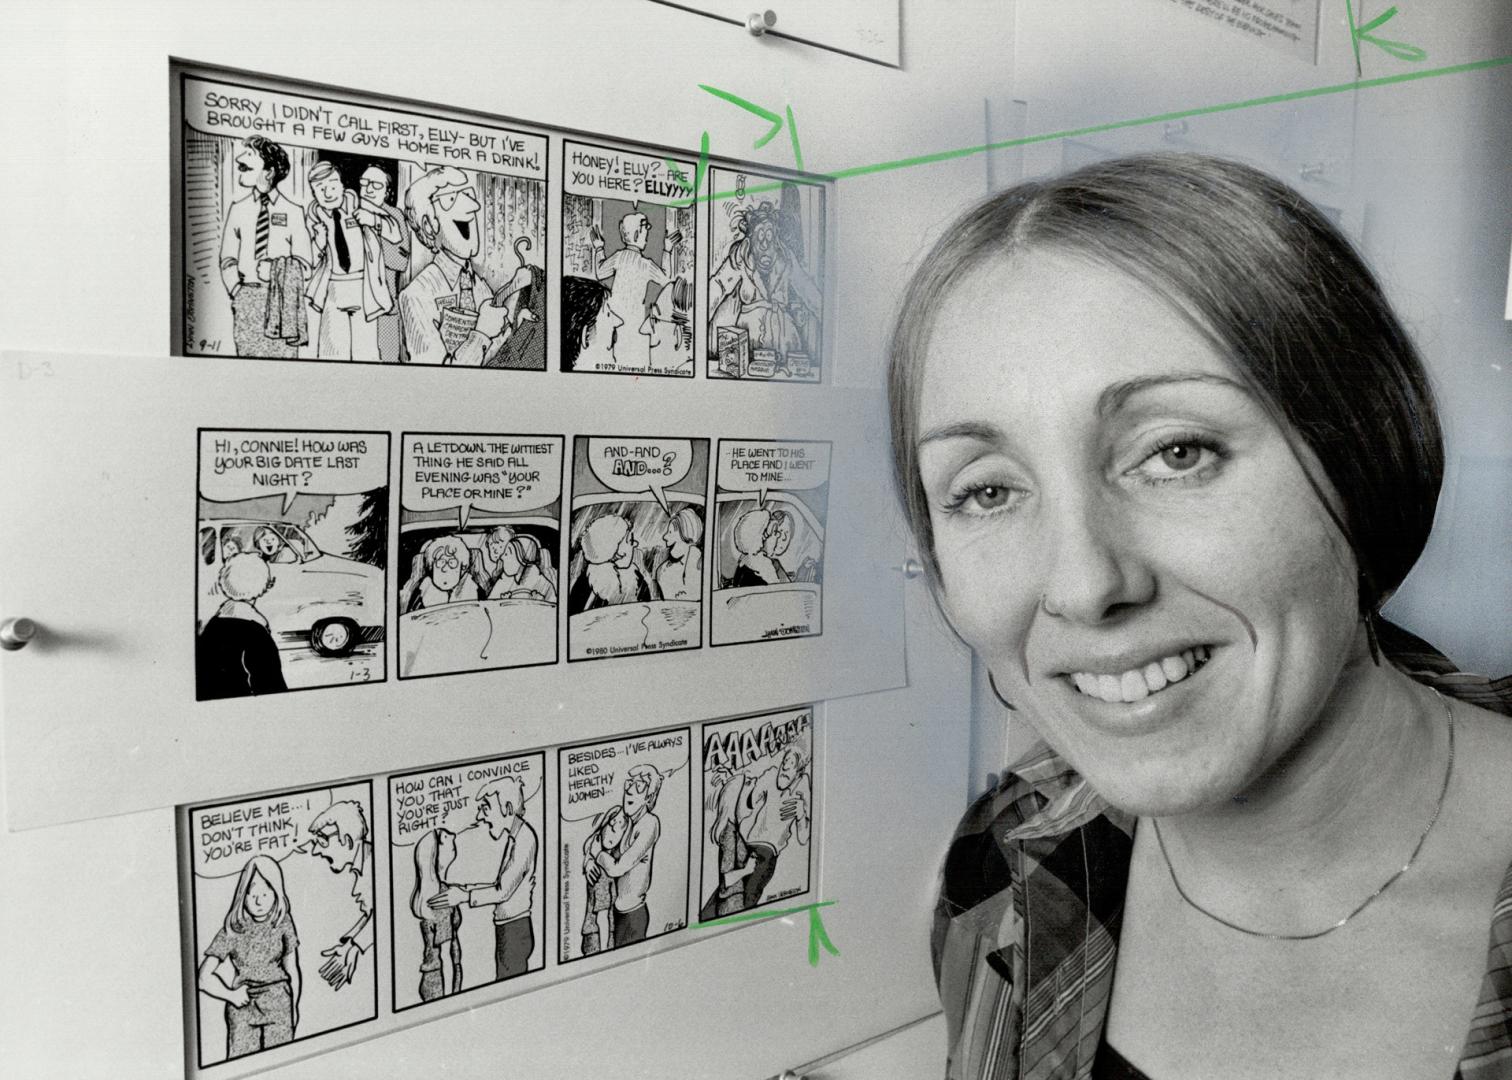 Meet the mom from Manitoba who's created a comic strip read by 15 million